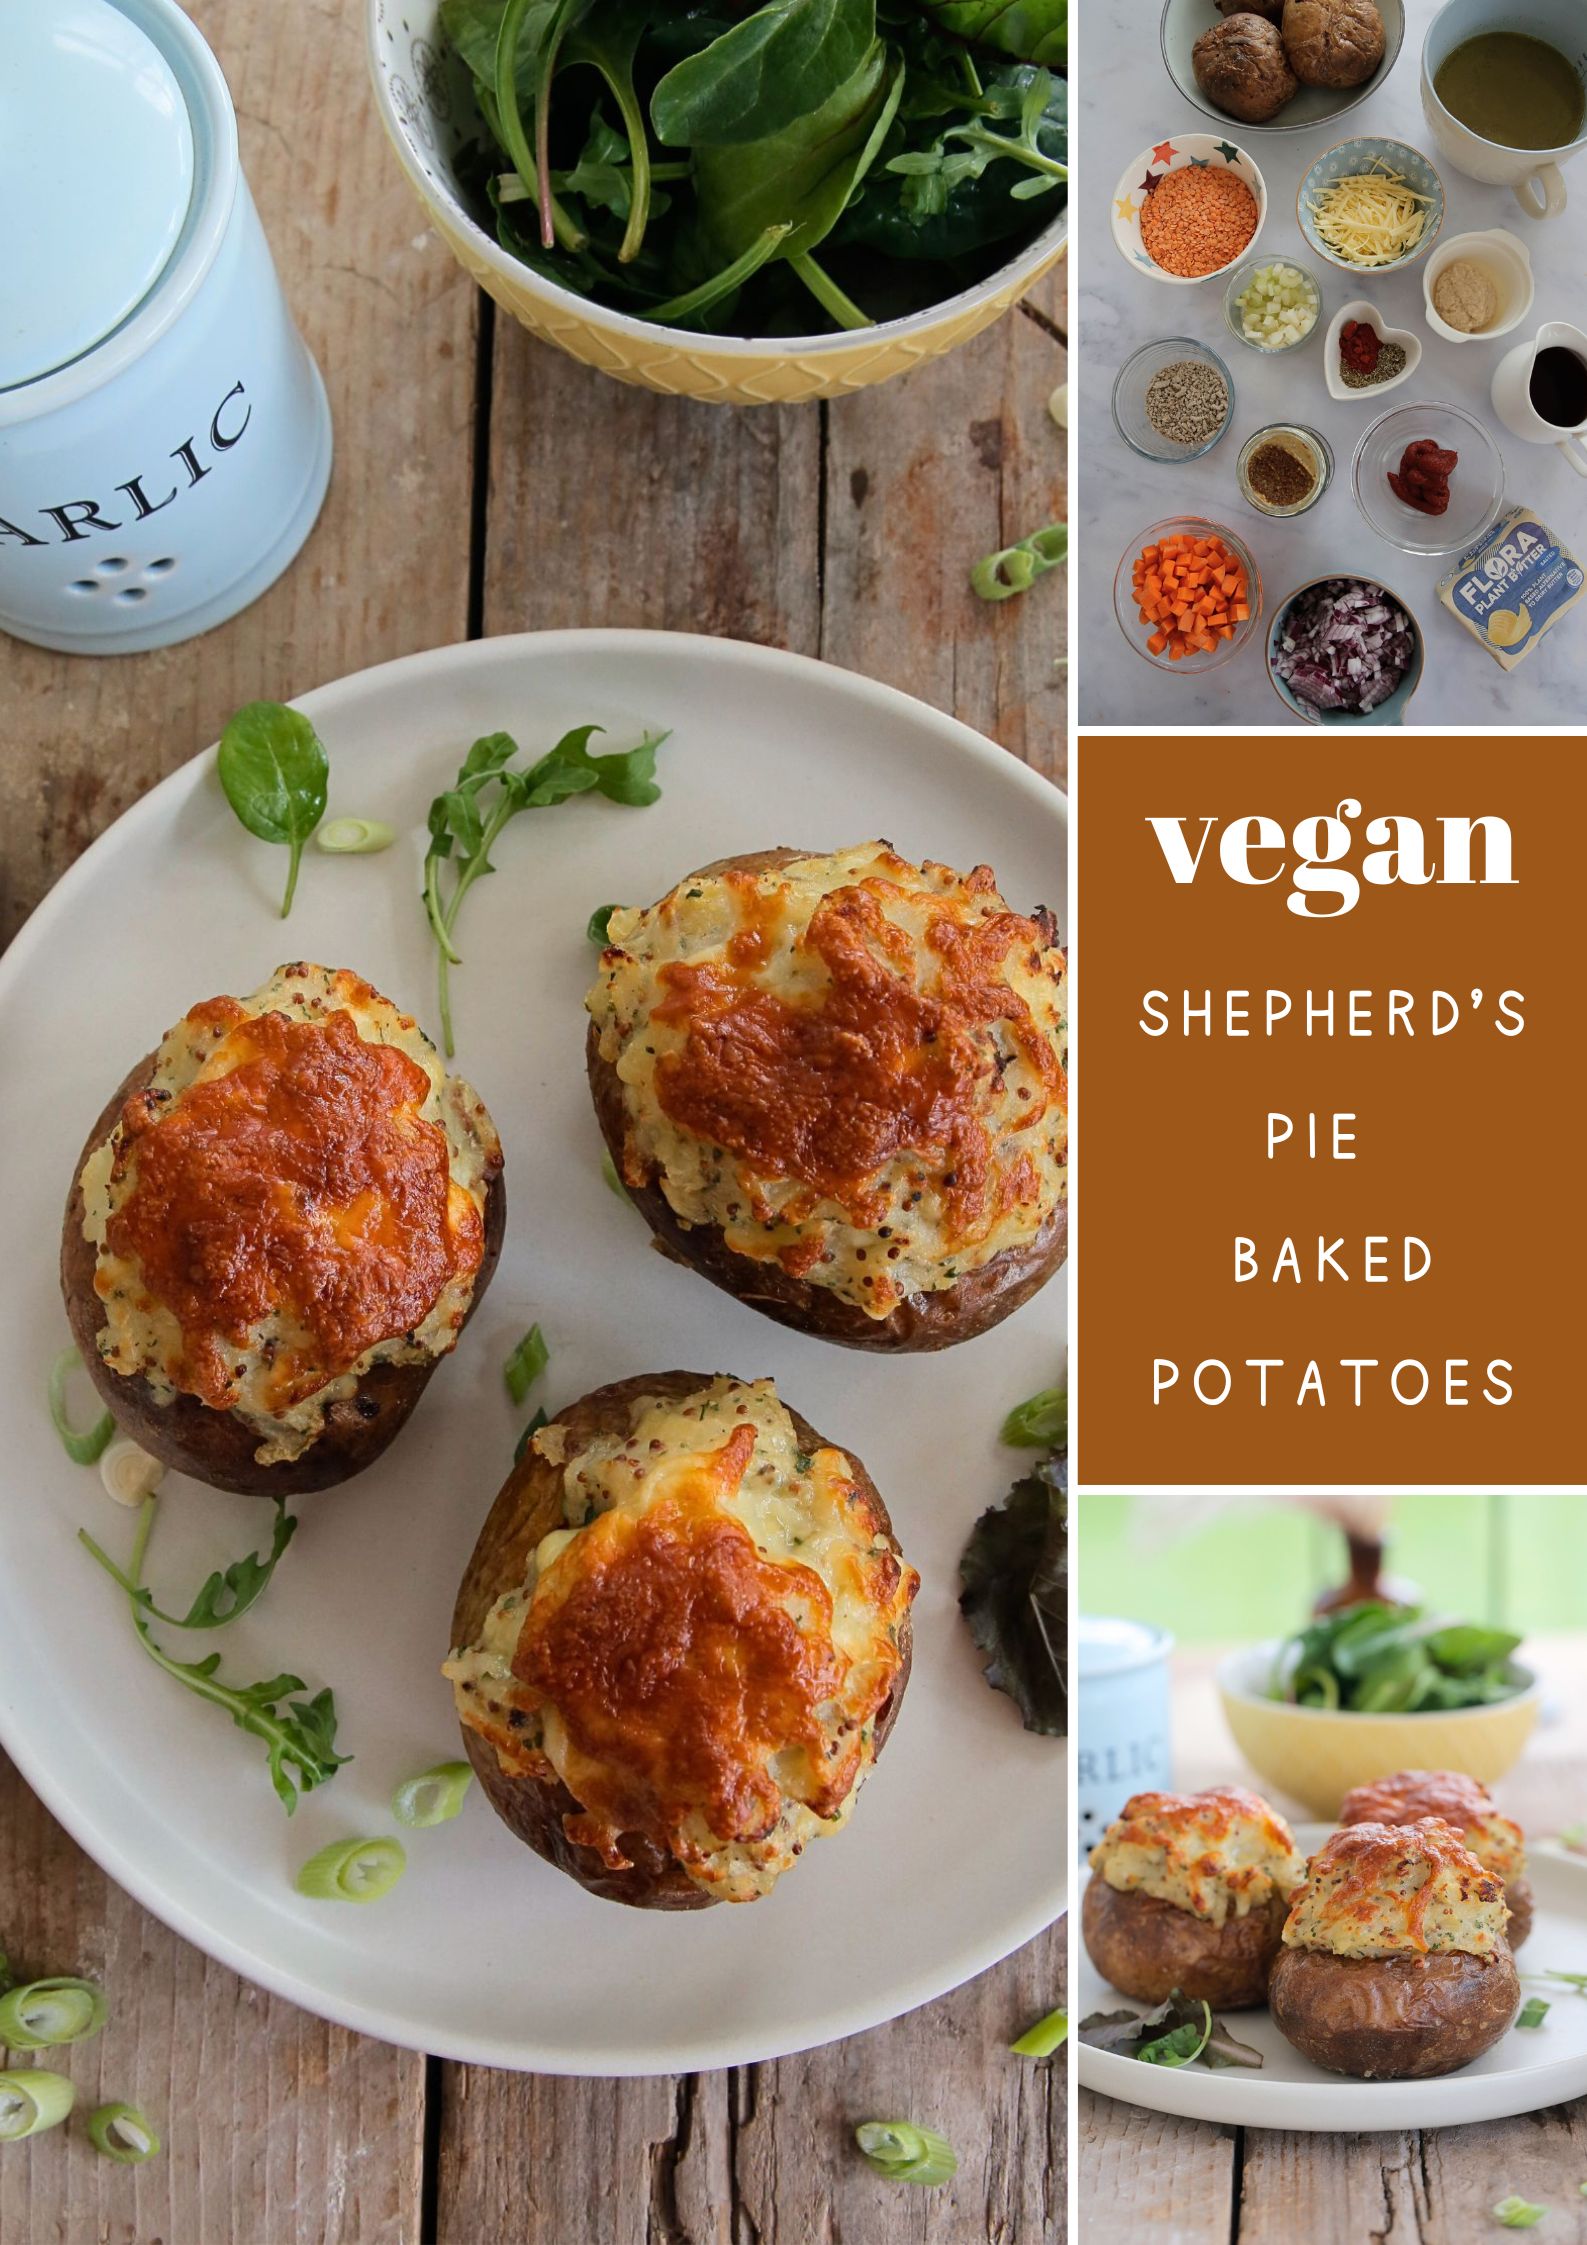 Vegan shepherds pie stuffed baked potatoes combines two great comfort foods for a make ahead lunch or hearty dinner when paired with extra veggies or crisp salad! #ovenbakedpotatoes #potatorecipes #twicebakedpotatoes #veganshepherdspie